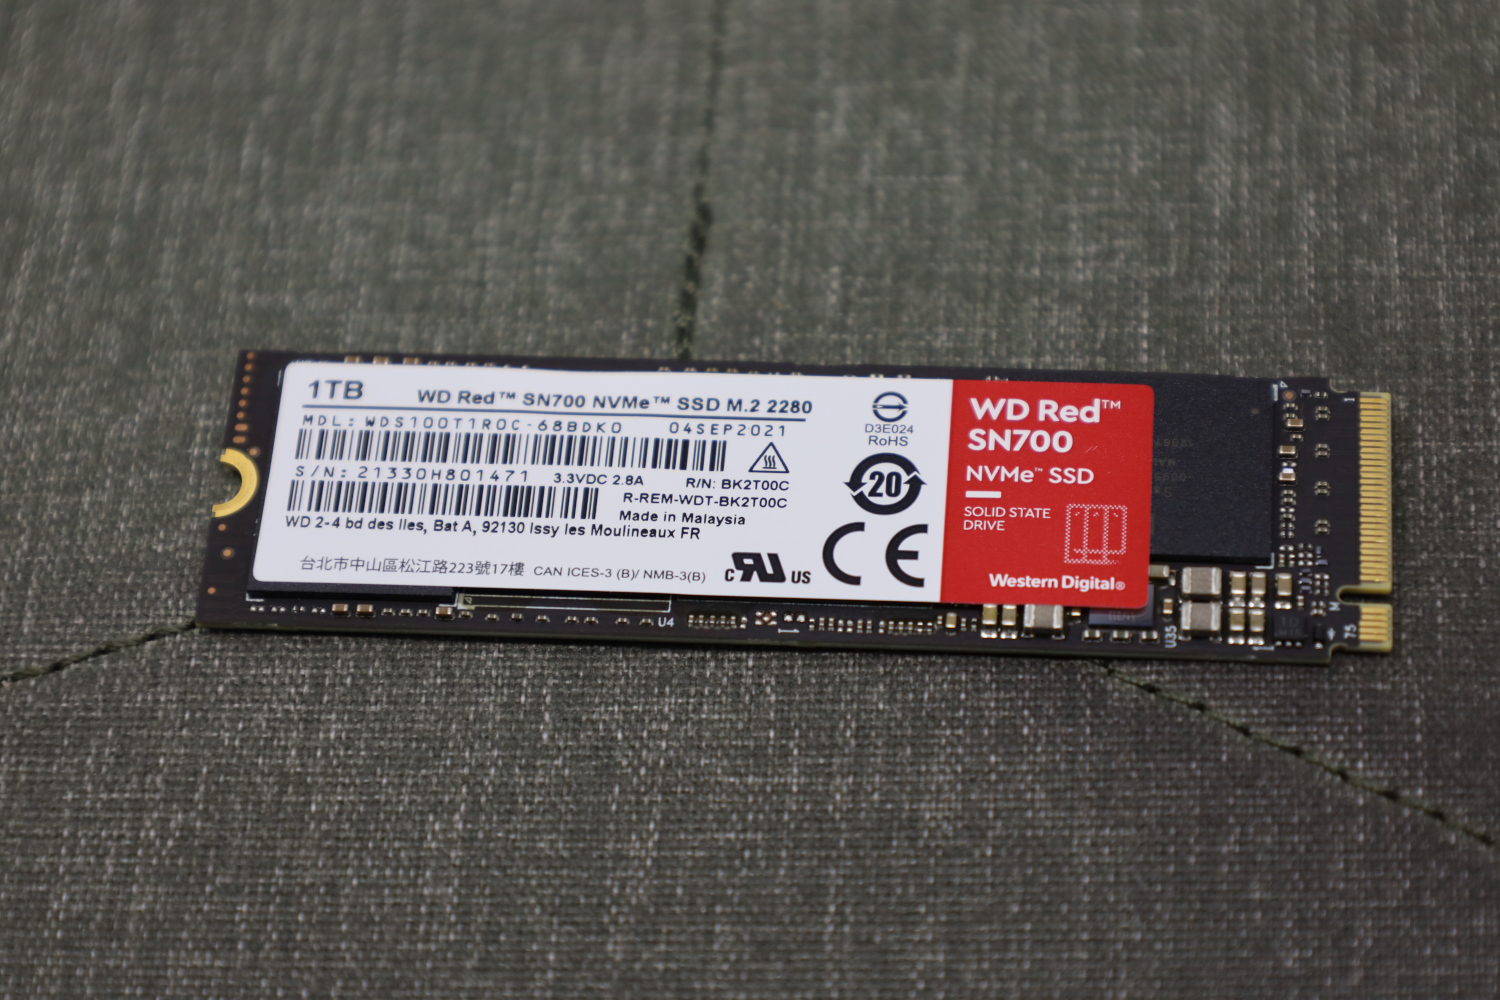 City Shilling Suppose WD Red SN700 1TB NVMe SSD Review Vastly Improved